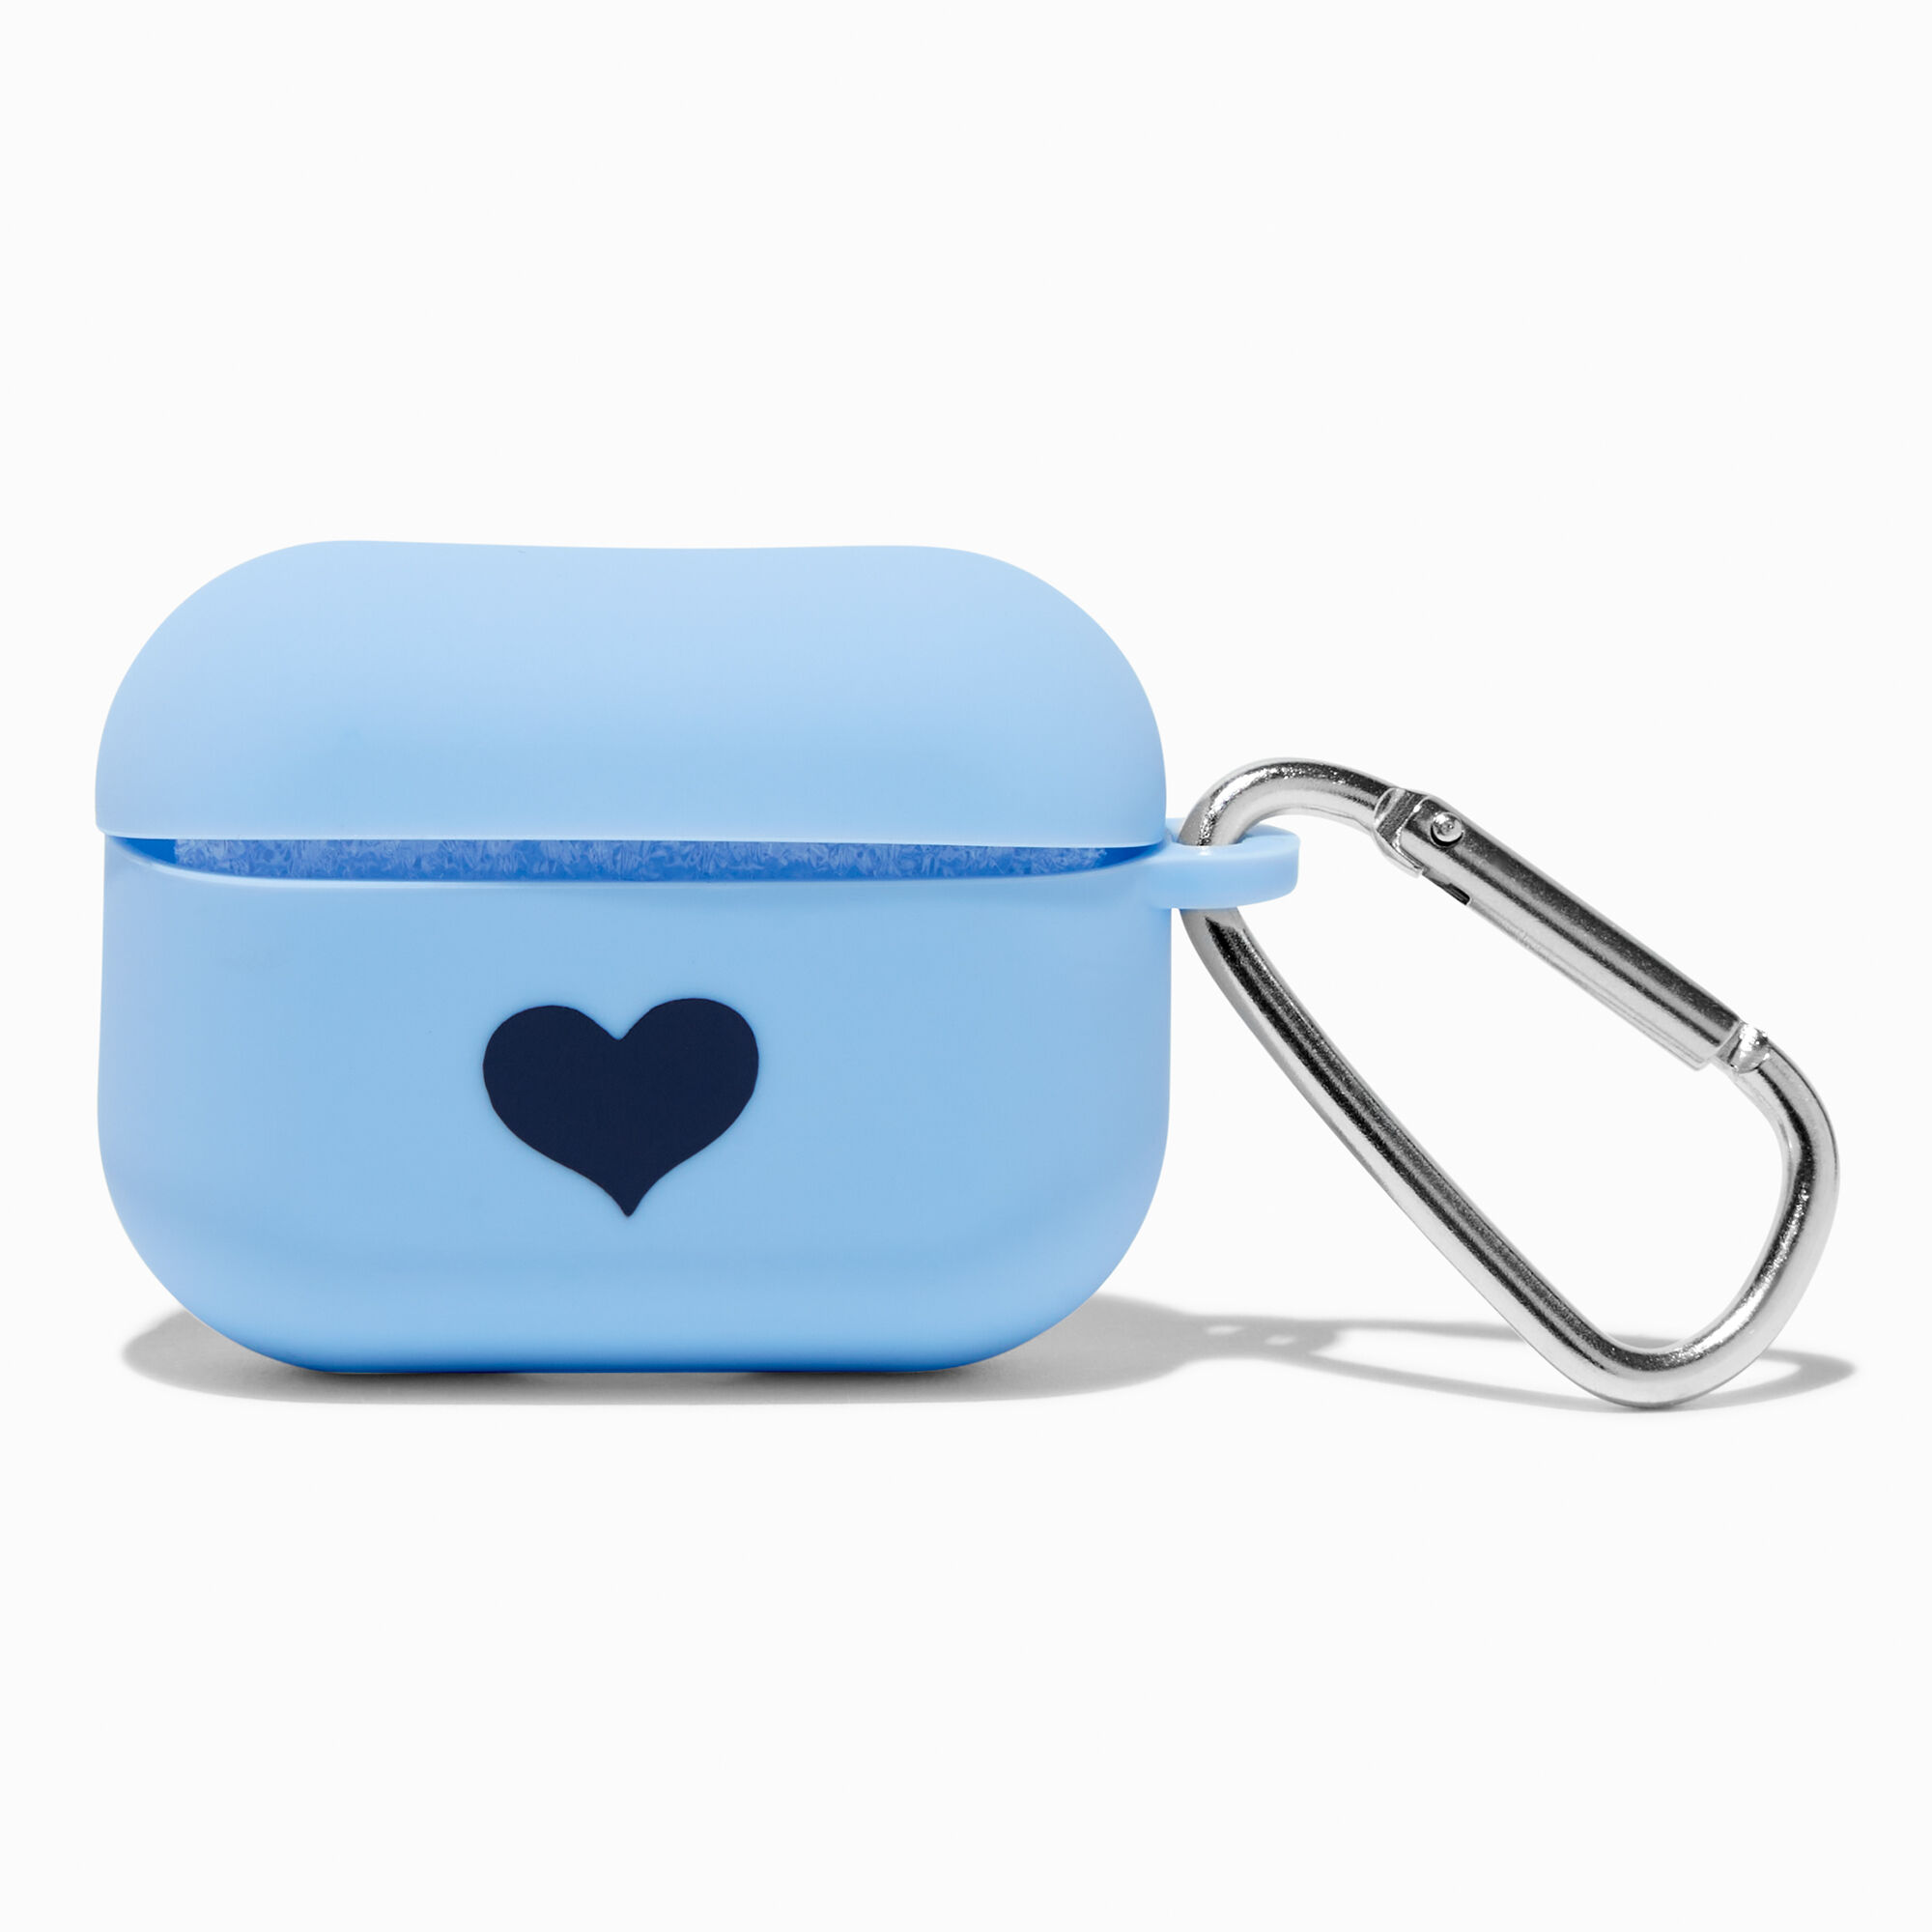 View Claires Heart Silicone Earbud Case Cover Compatible With Apple Airpods Pro Baby Blue information